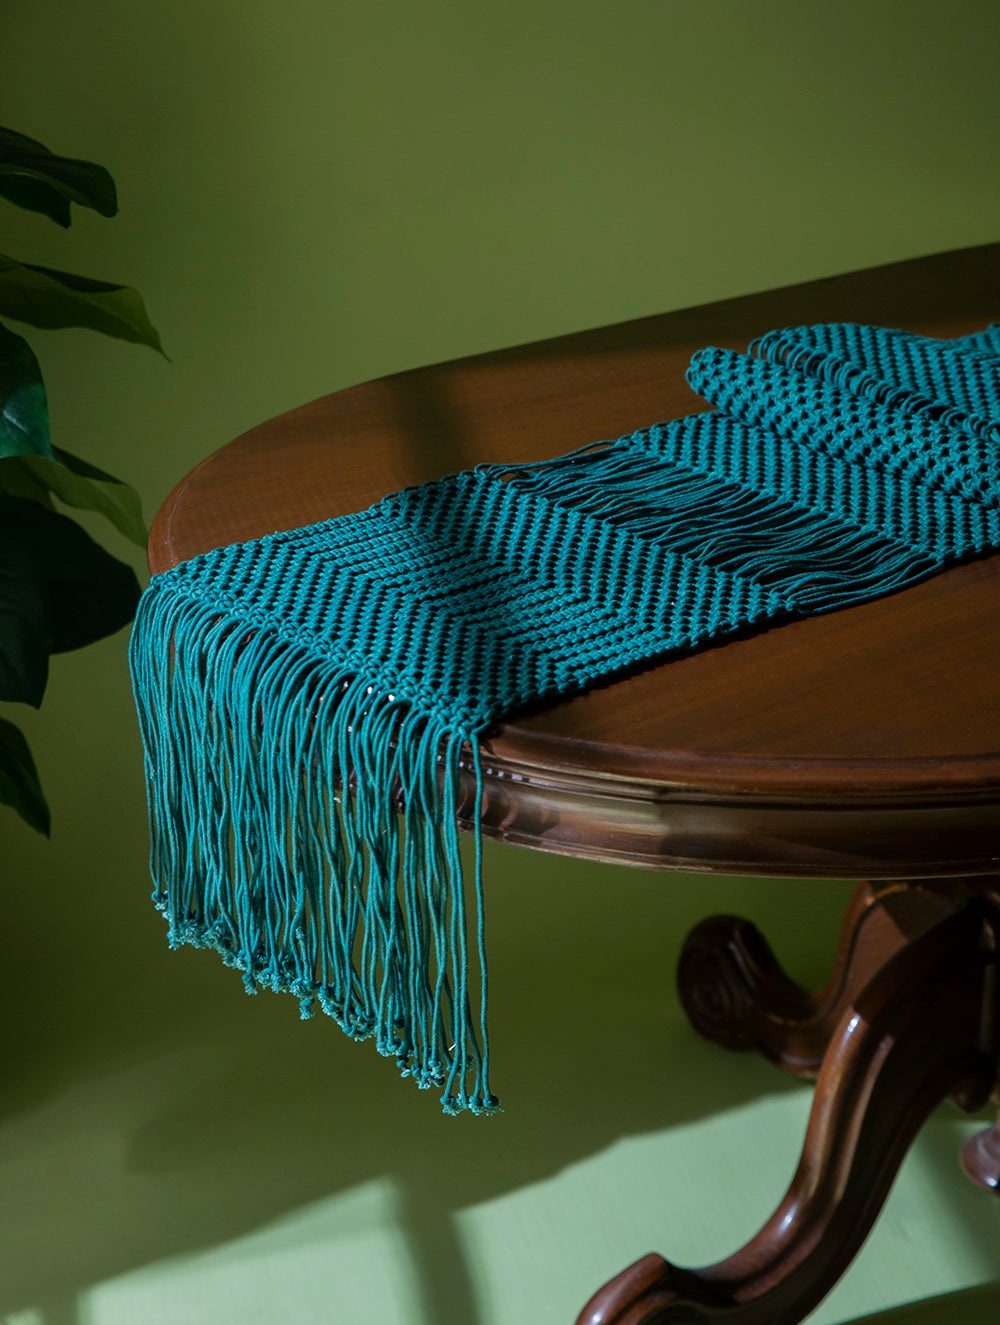 Load image into Gallery viewer, Handknotted Macramé Table Runner - Floating Dashes, Blue